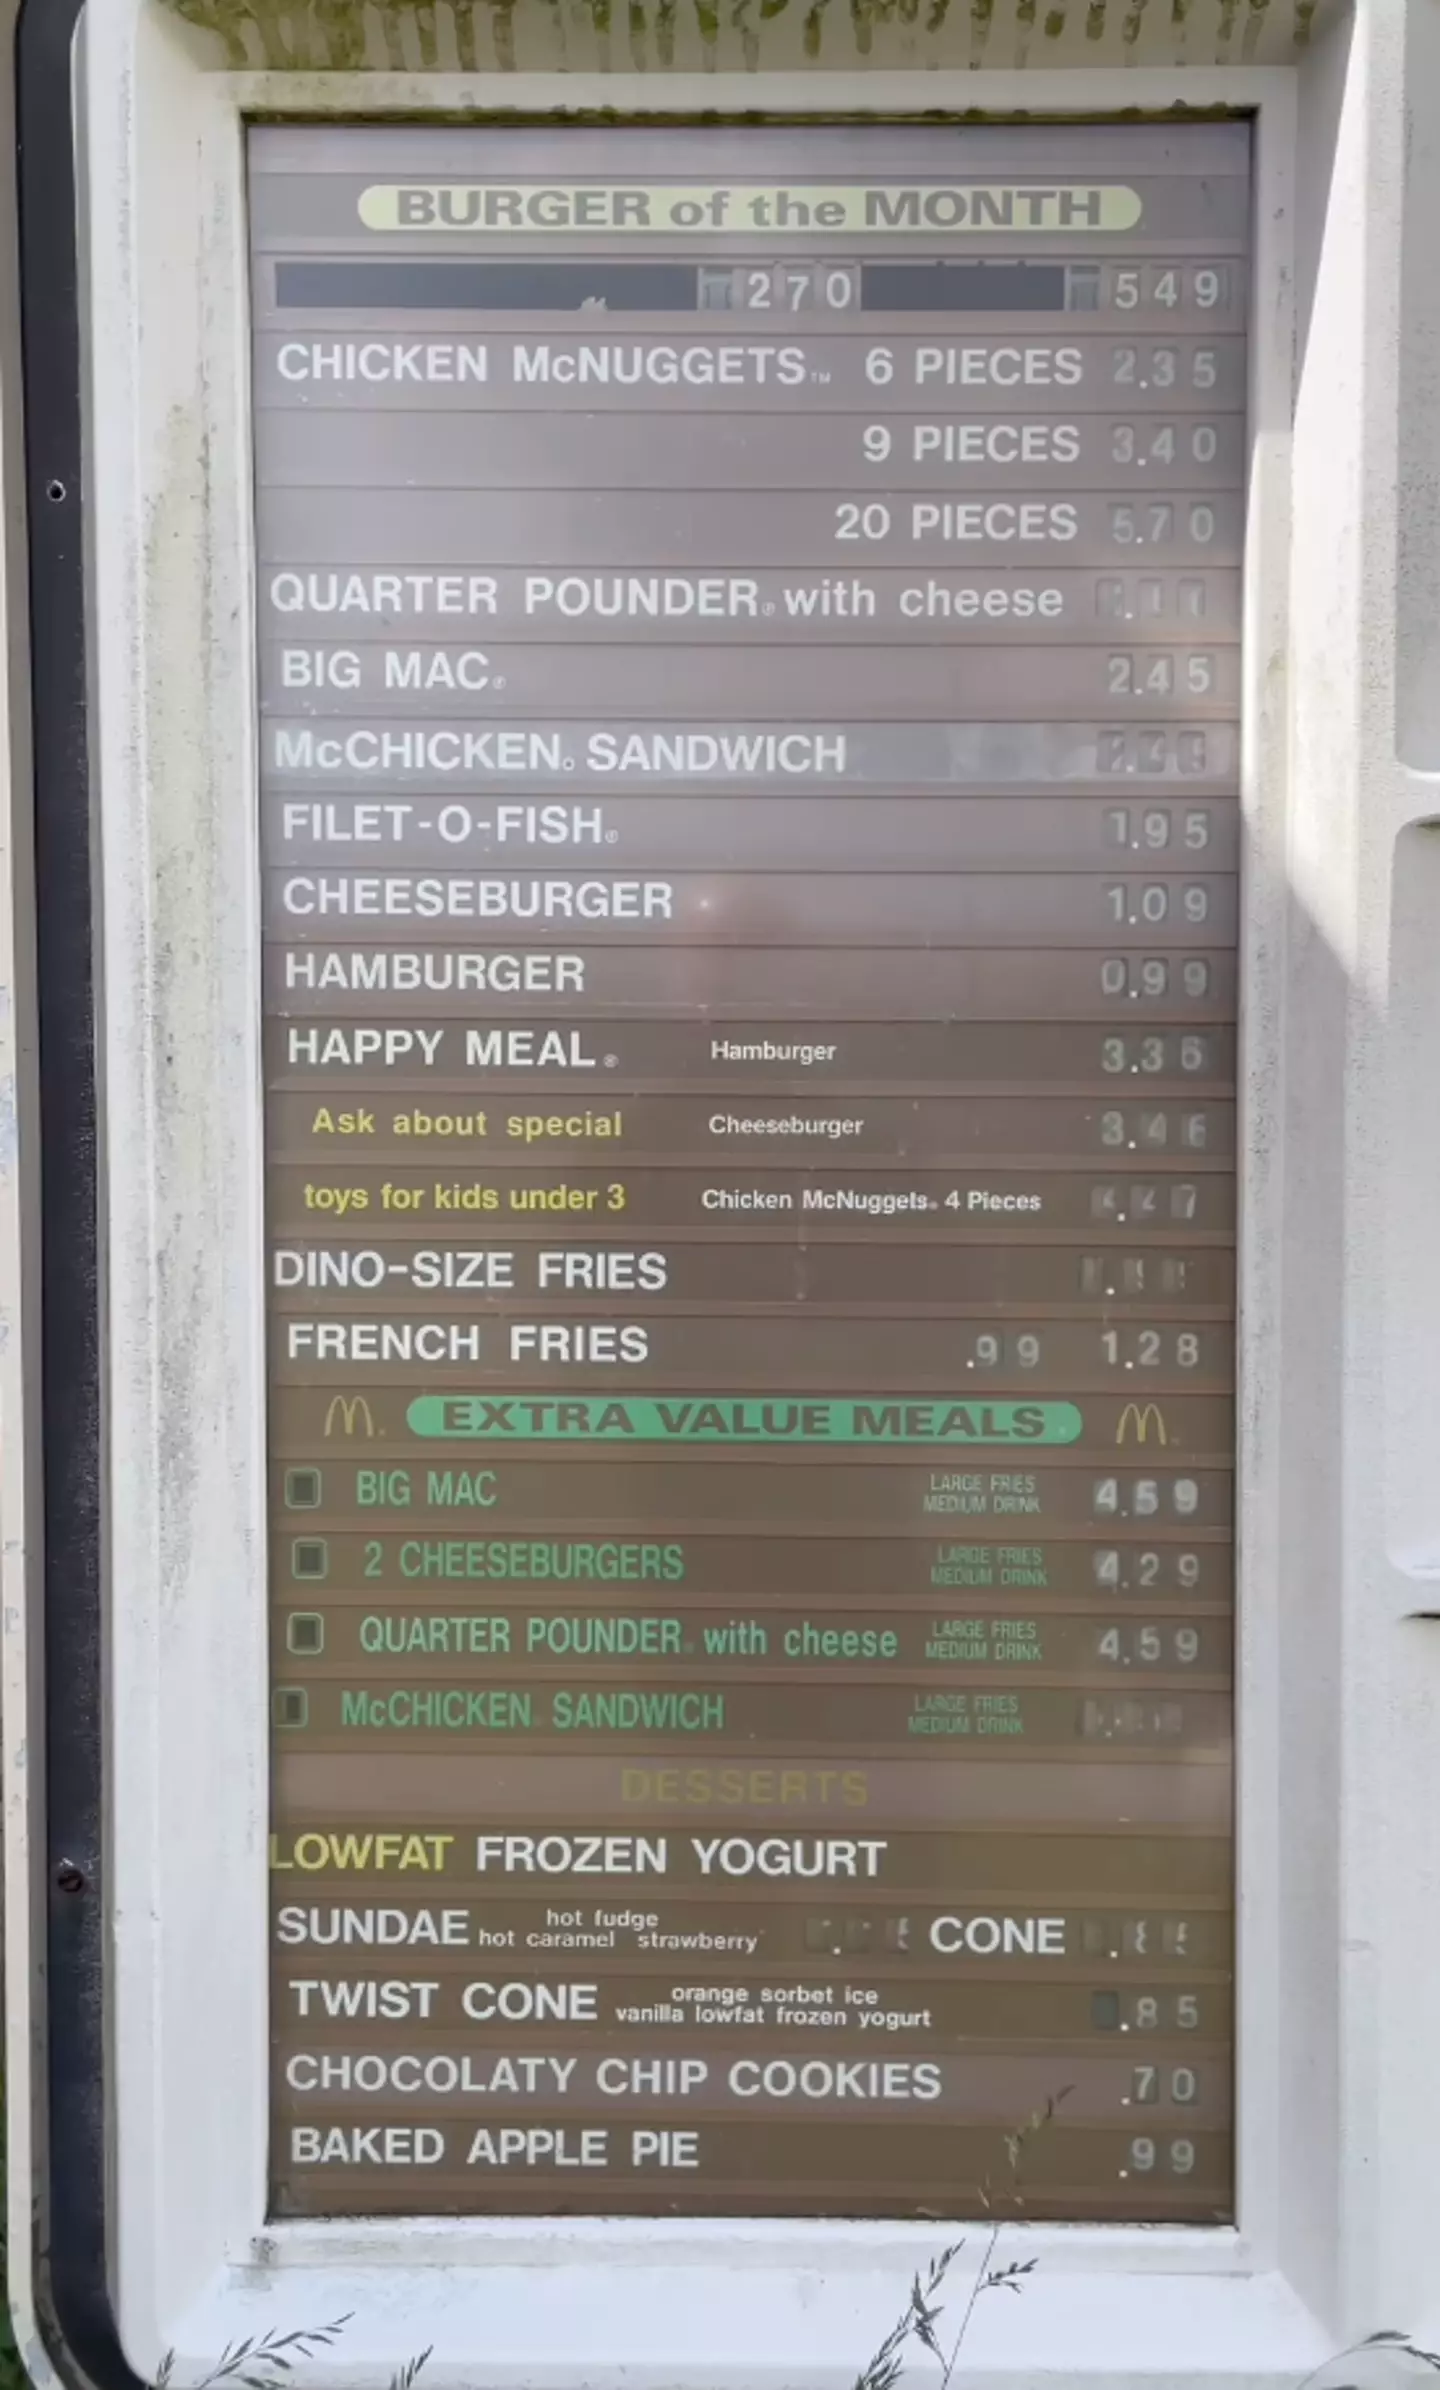 Social media users were stunned by how cheap prices were at a McDonald's in the 90s